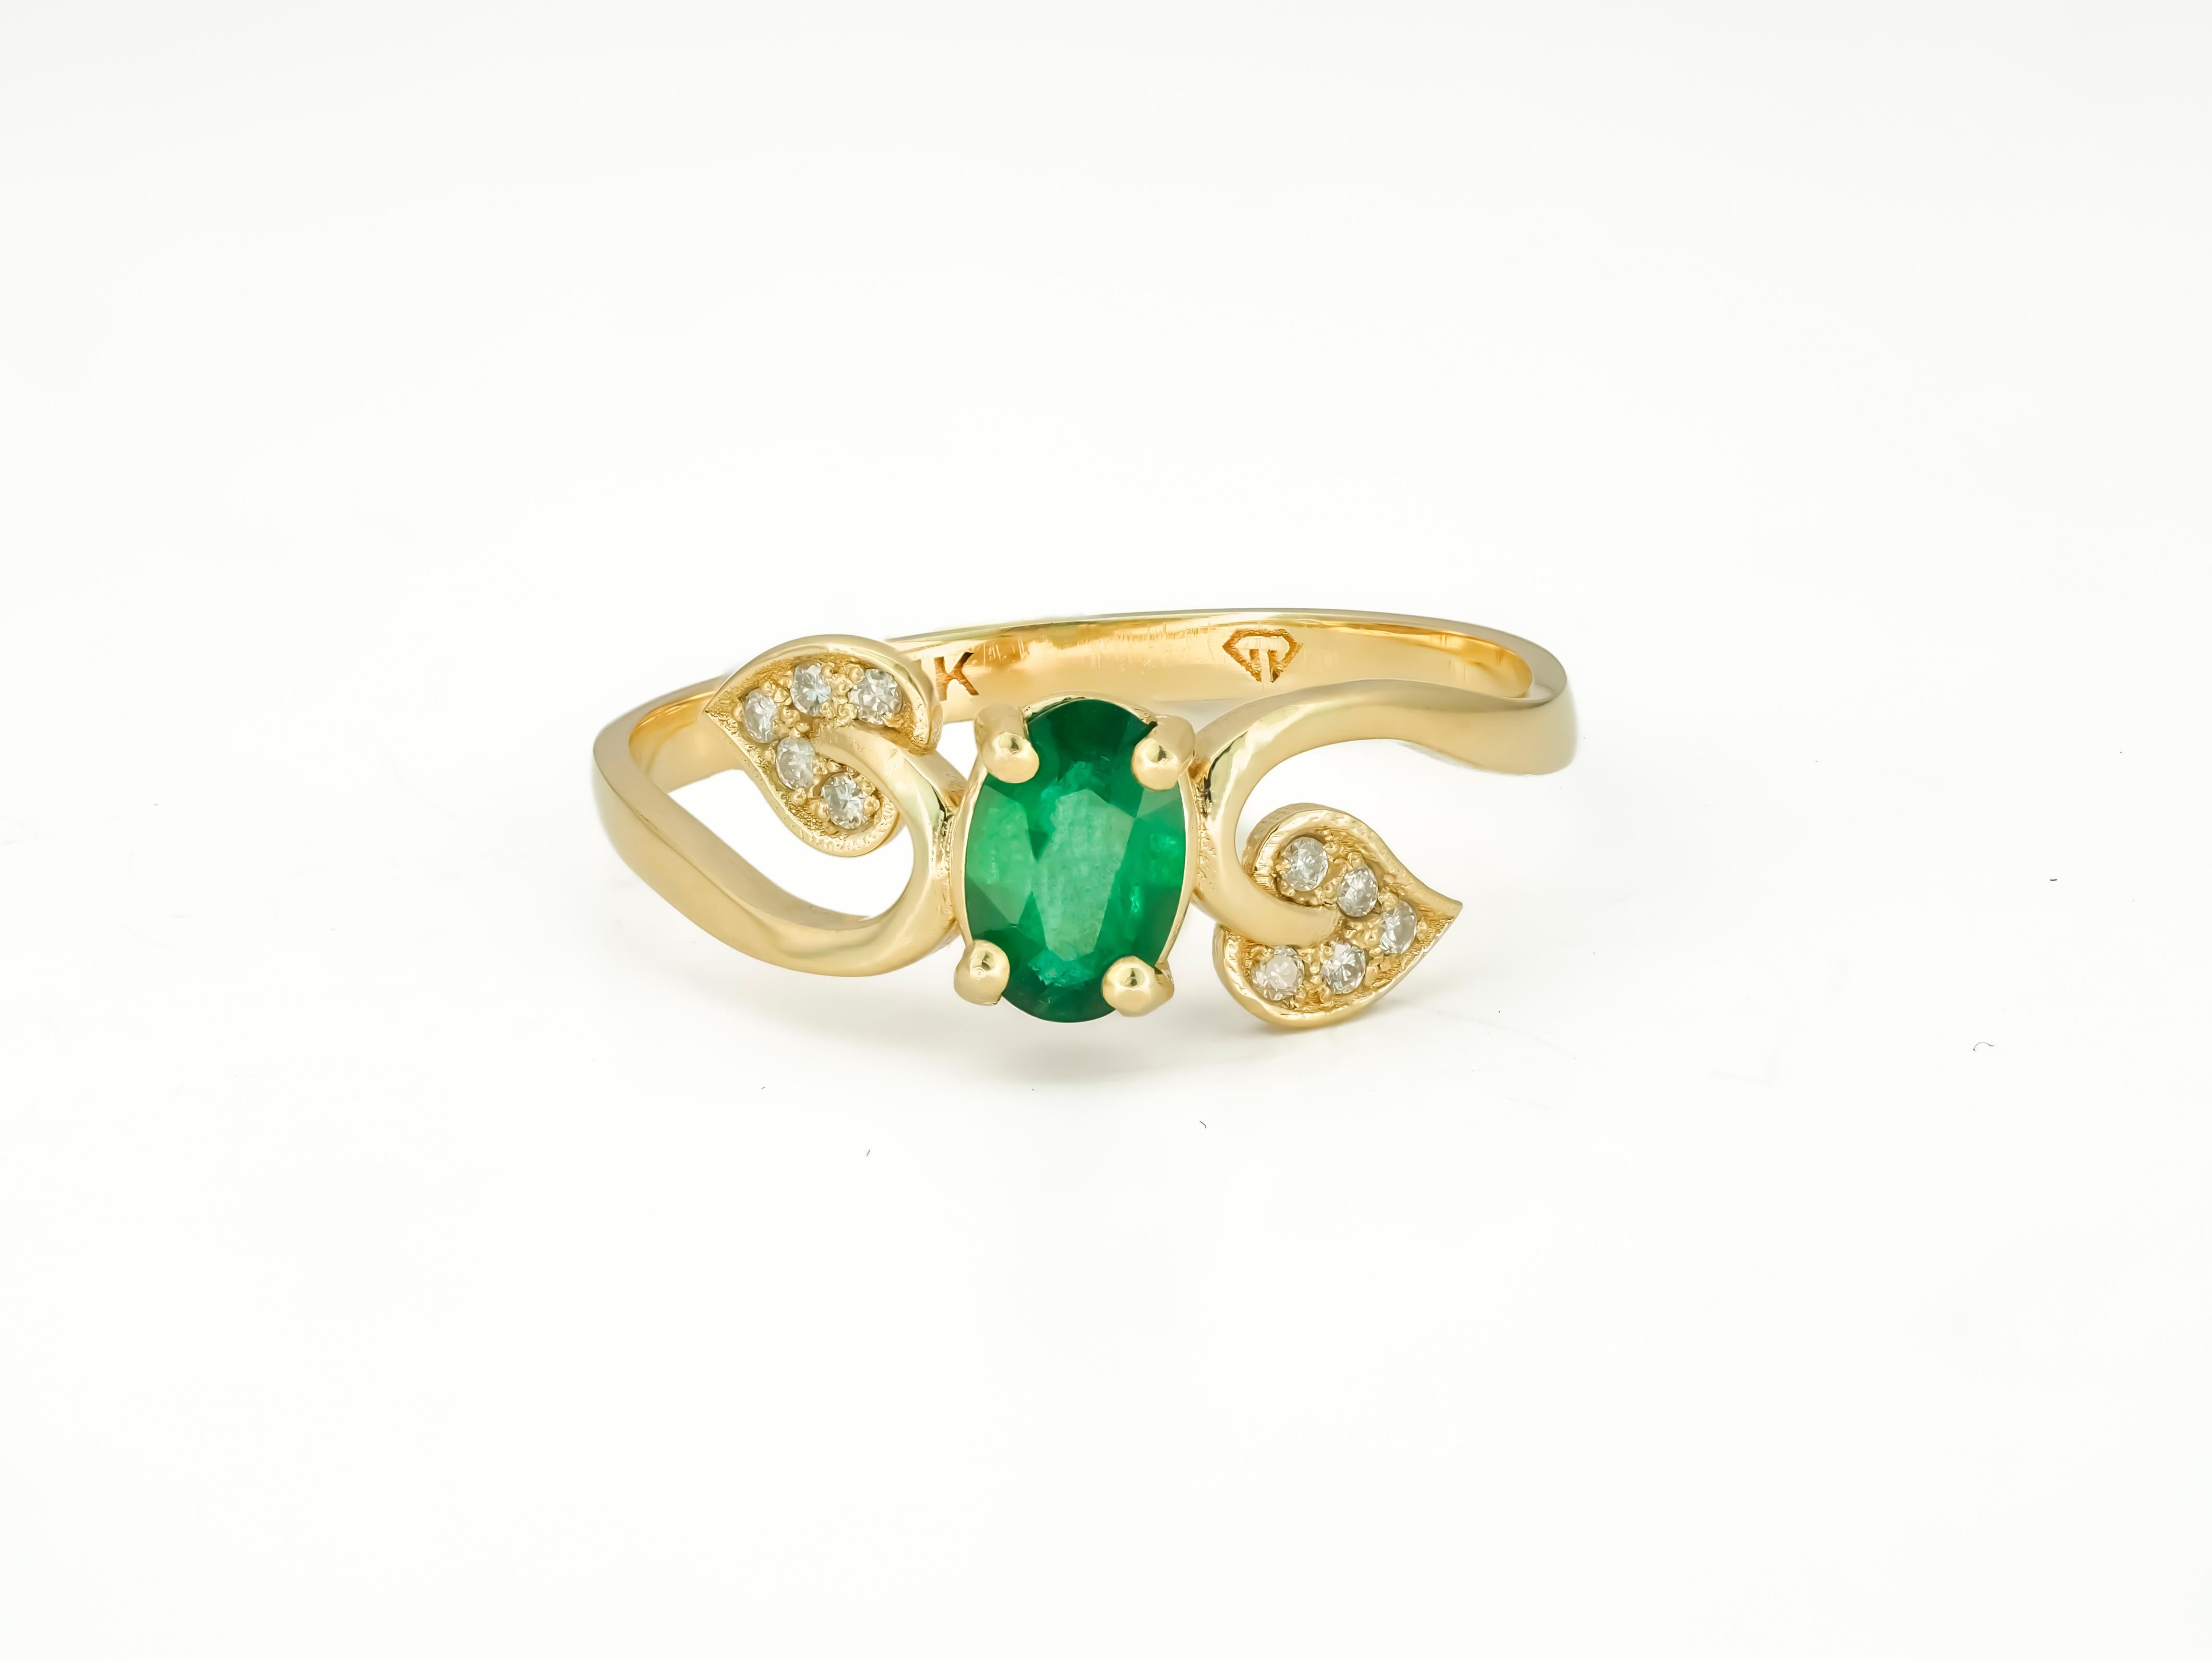 Genuine emerald 14k gold ring. 
Emerald engagement ring. Emerald vintage ring. Emerald gold ring. May birthstone ring. Oval emerald ring.

Metal: 14kt solid gold
Total weight: 1.8 gr. (depends from size)

Central gemstone: natural emerald
Color: